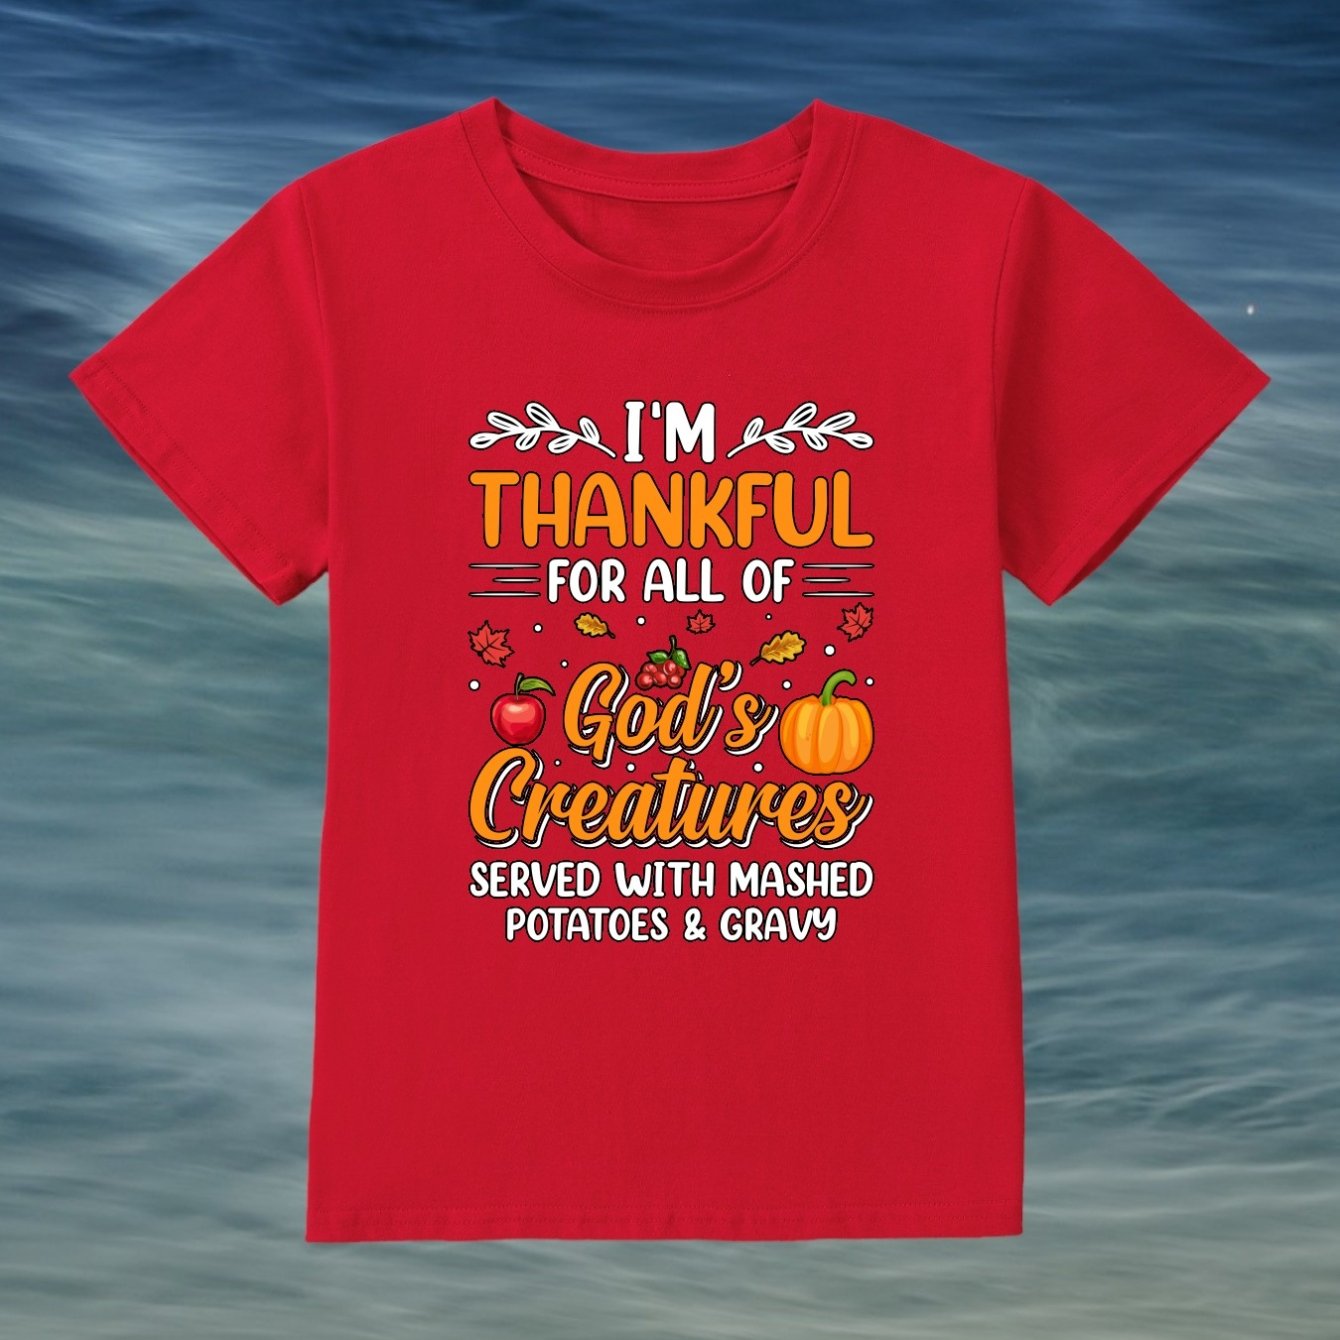 I'm Thankful For All Of God's Creatures (thanksgiving themed) Youth Christian T-shirt claimedbygoddesigns